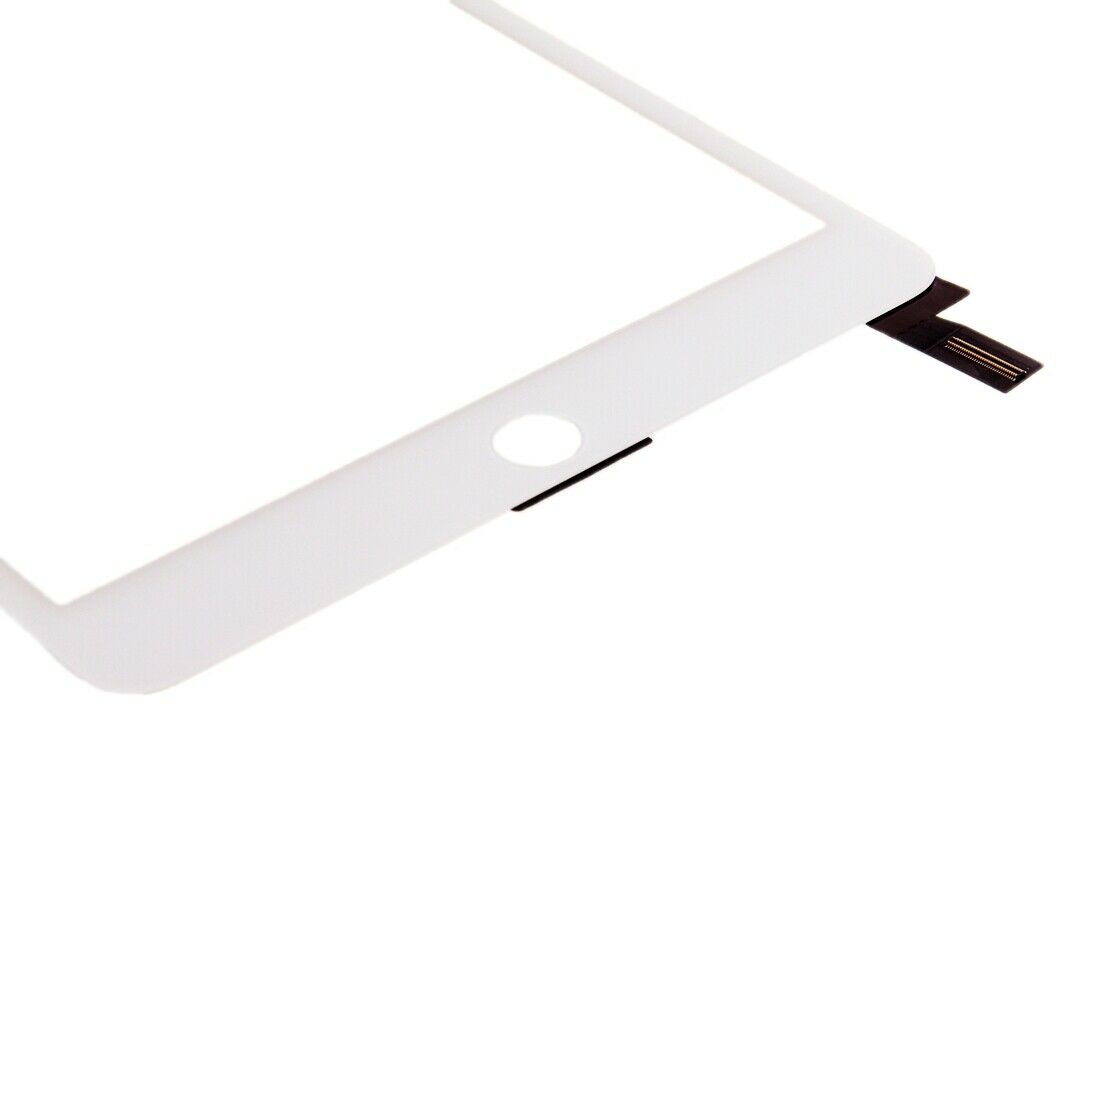 Apple iPad Mini 4 Replacement Touch Screen Digitizer - White for [product_price] - First Help Tech